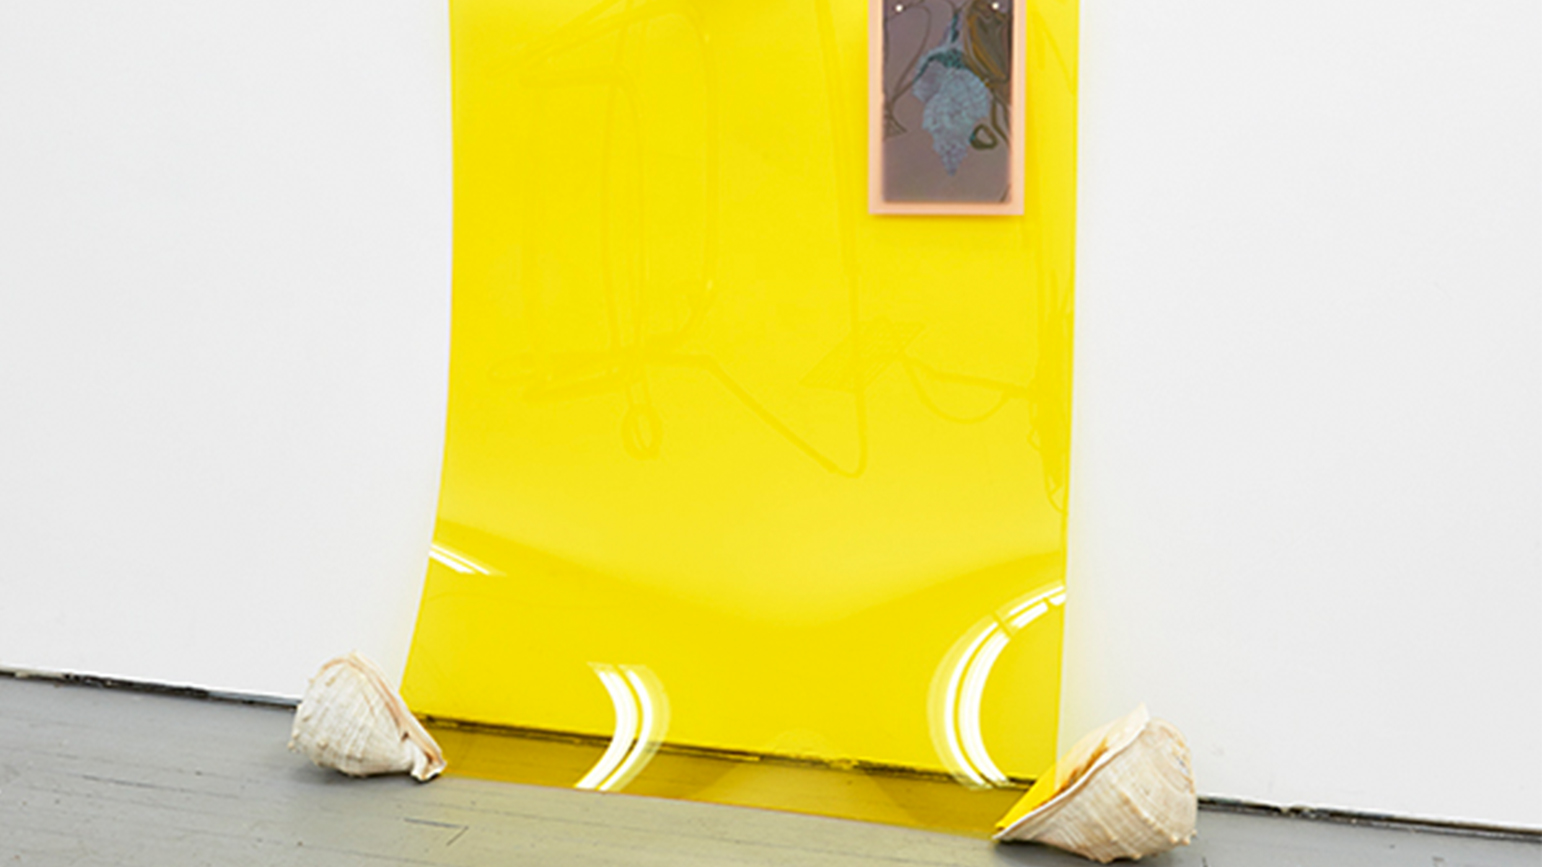 Image of artwork by Las Hermanas Iglesias, showing a large transparent yellow sheet leaning against a wall with conch shells.